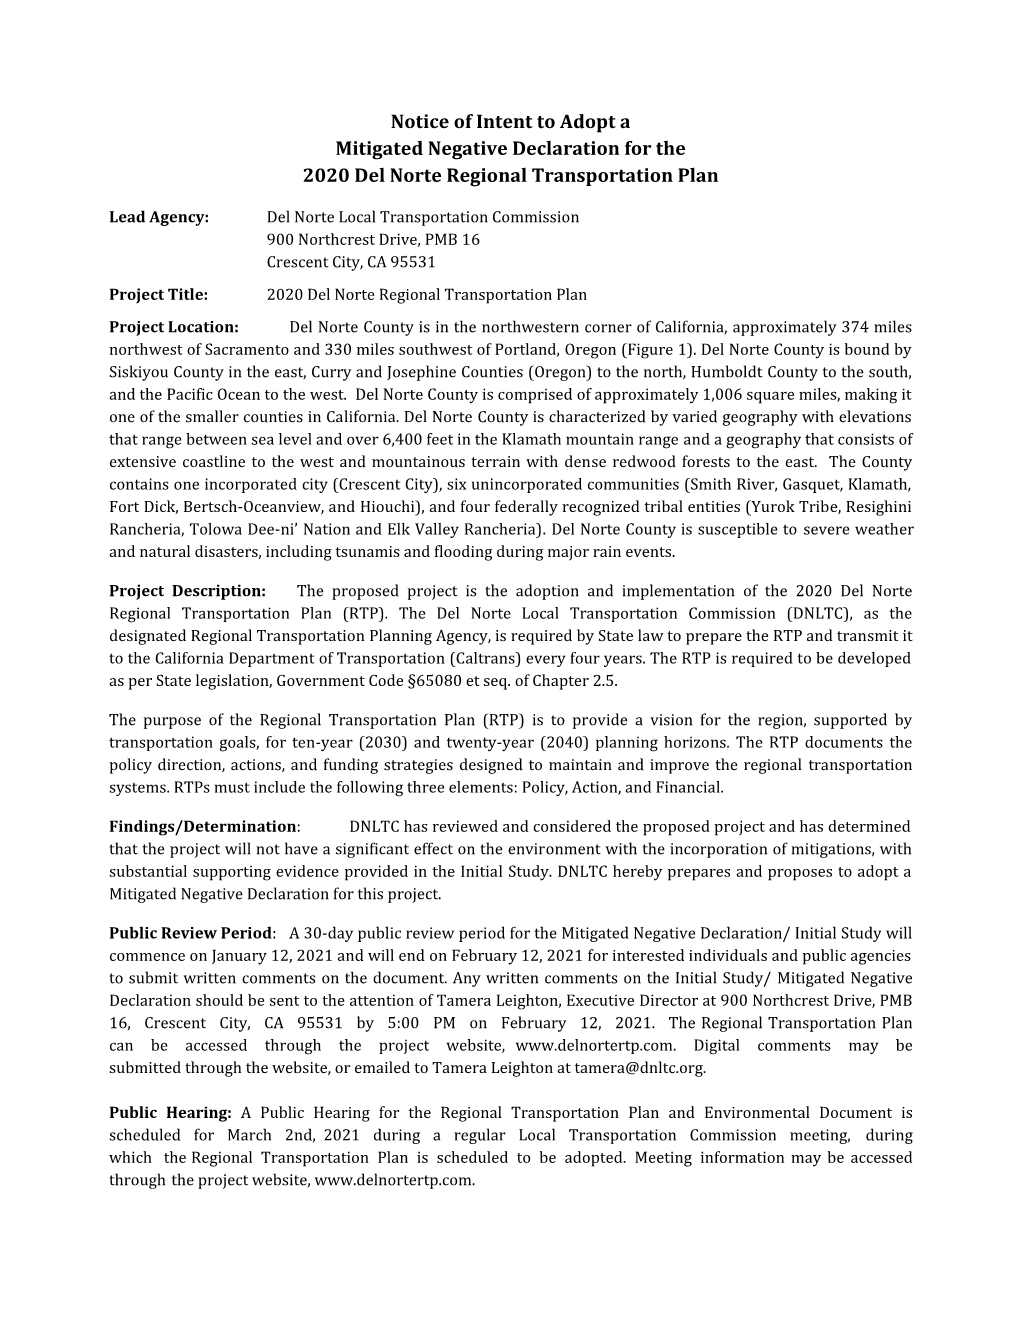 Notice of Intent to Adopt a Mitigated Negative Declaration for the 2020 Del Norte Regional Transportation Plan